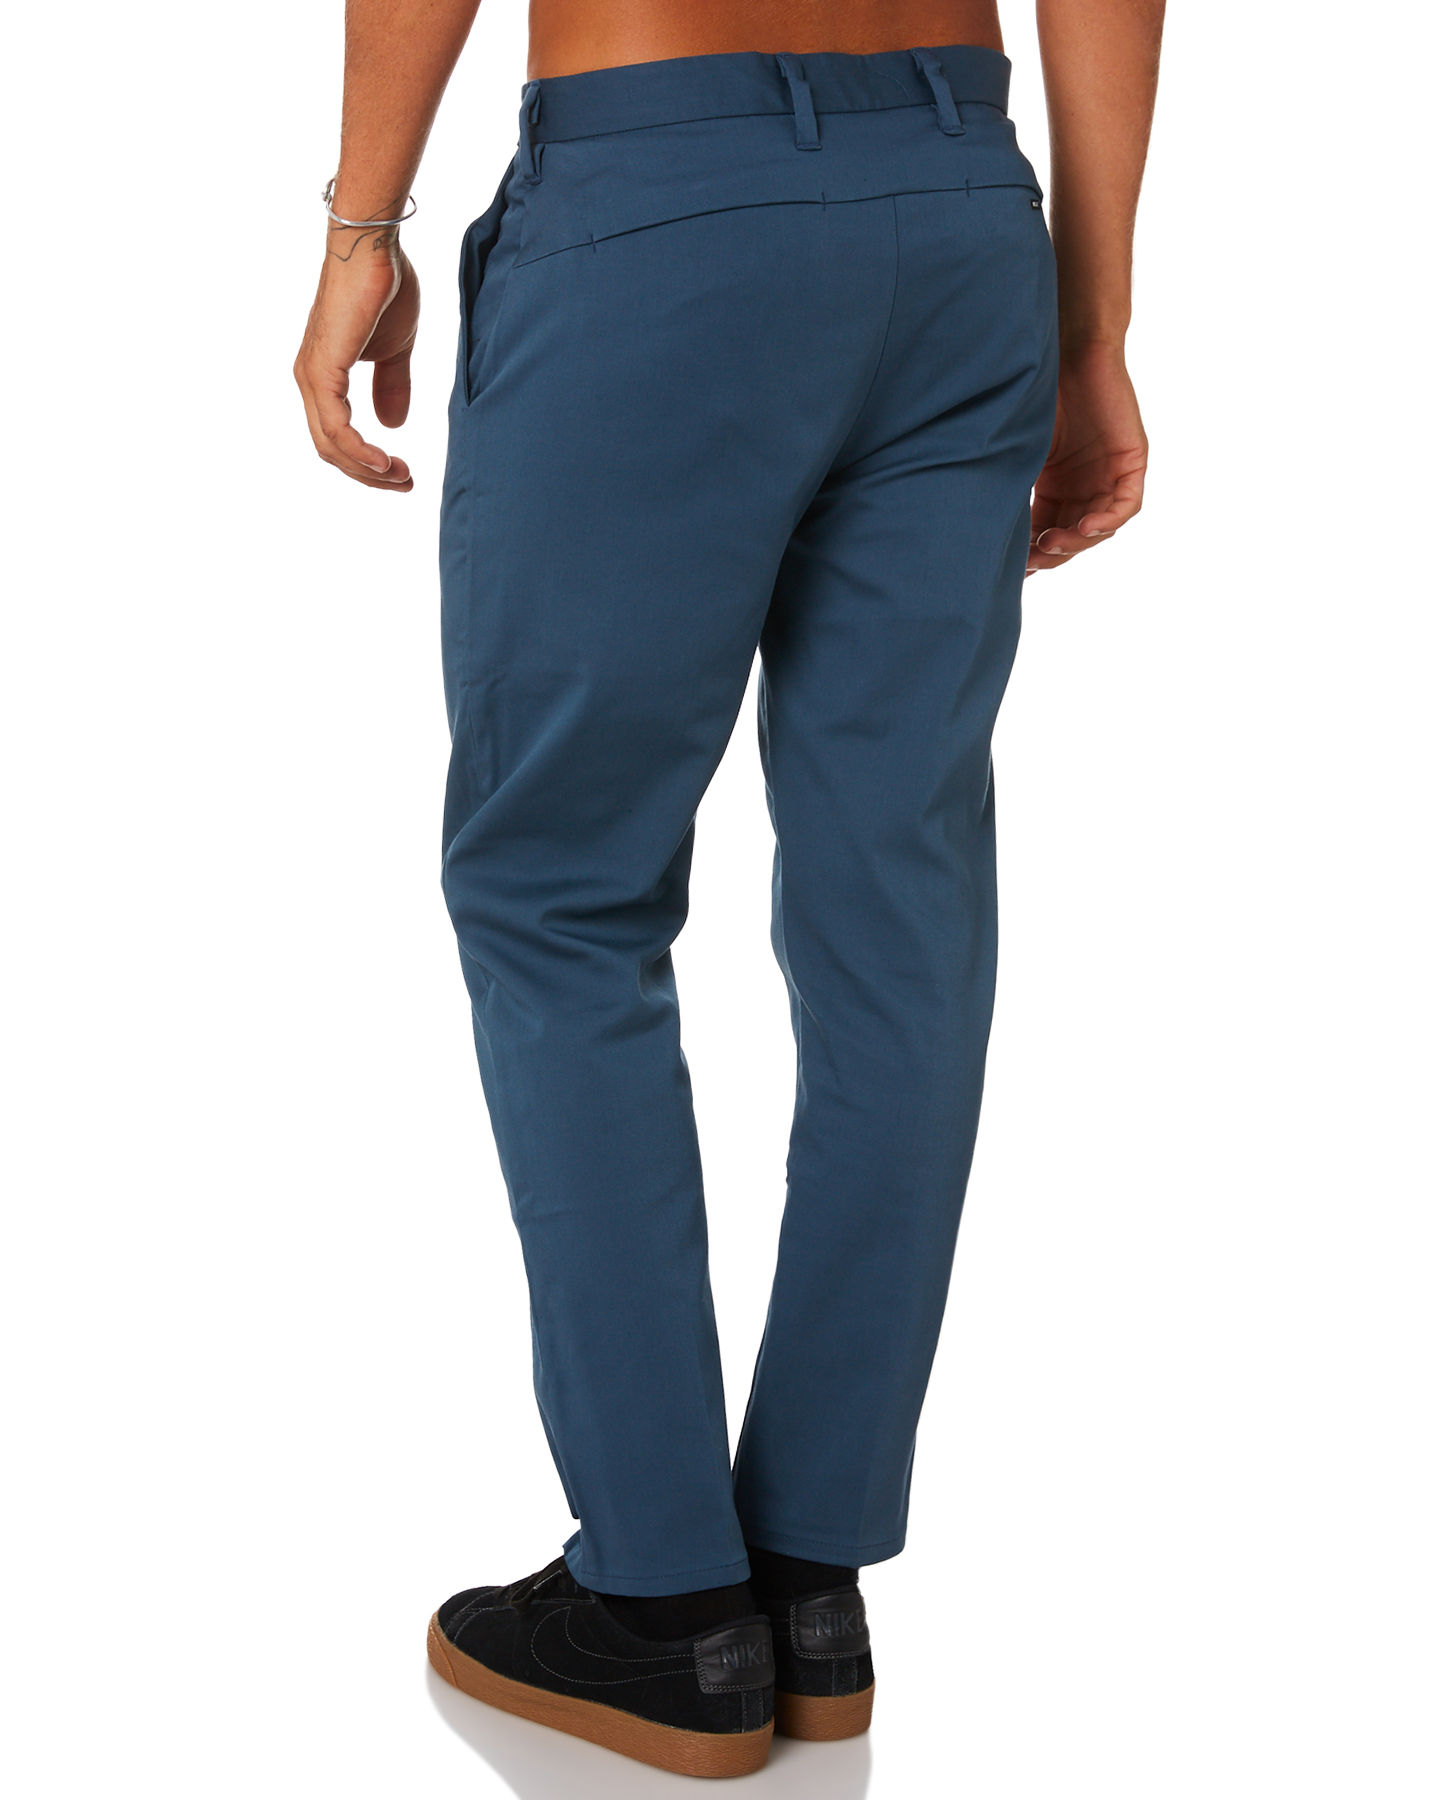 Hurley Transistor Mens Pant - Squadron Blue | SurfStitch